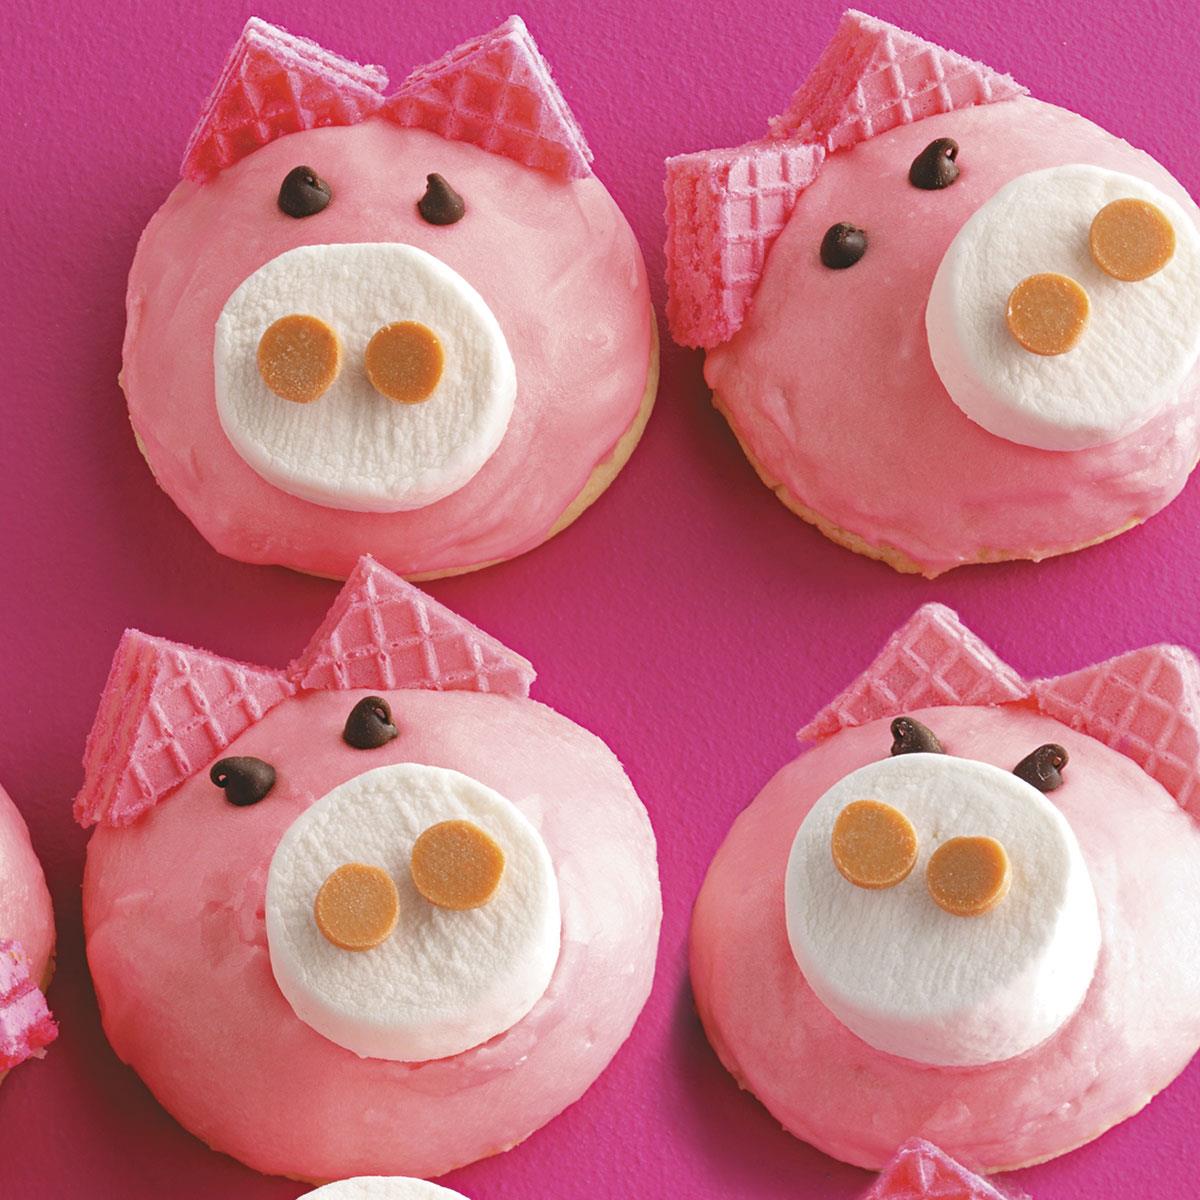 Cute Pig Cookies Recipe: How to Make It